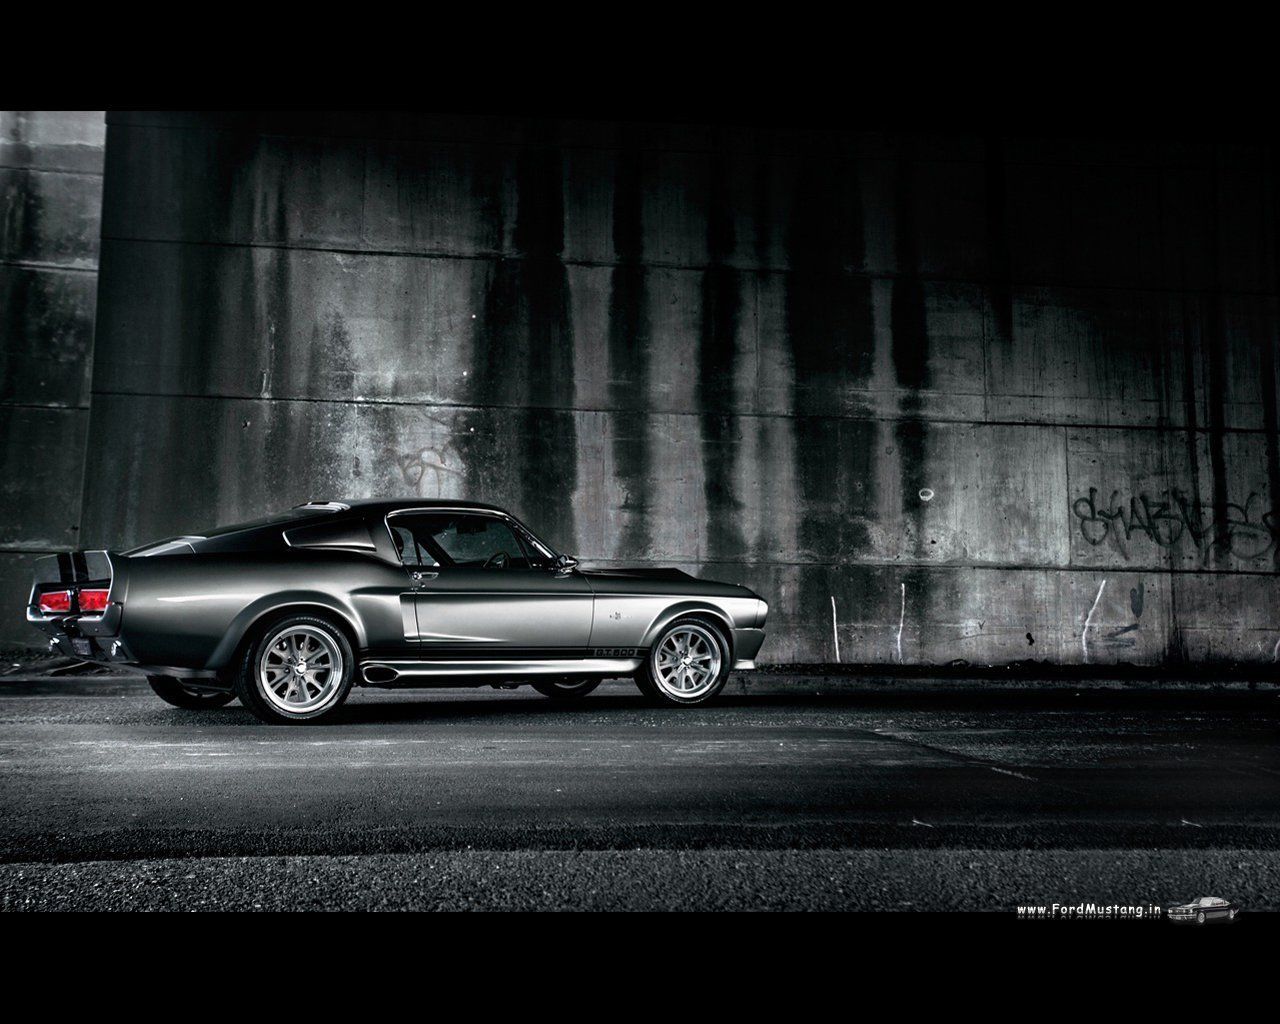 2015 Ford Mustang Shelby GT500 - image #404